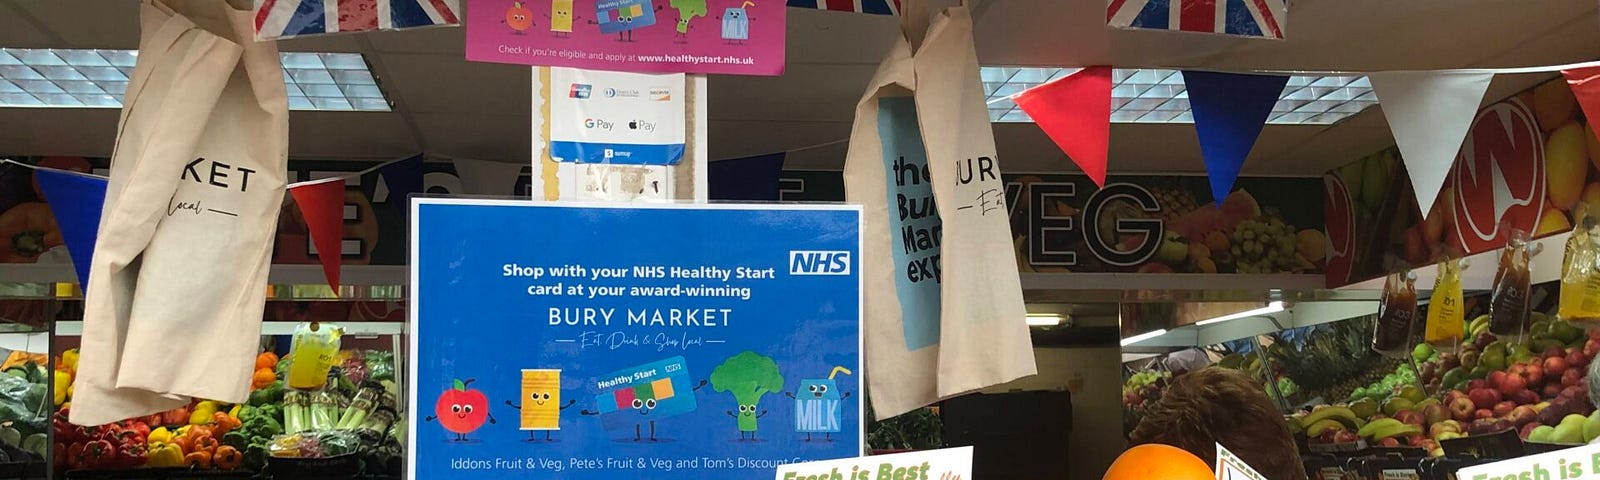 A fruit and veg stall at Bury Market with a sign saying “shop with your NHS Healthy Start card at your award-winning Bury Market”